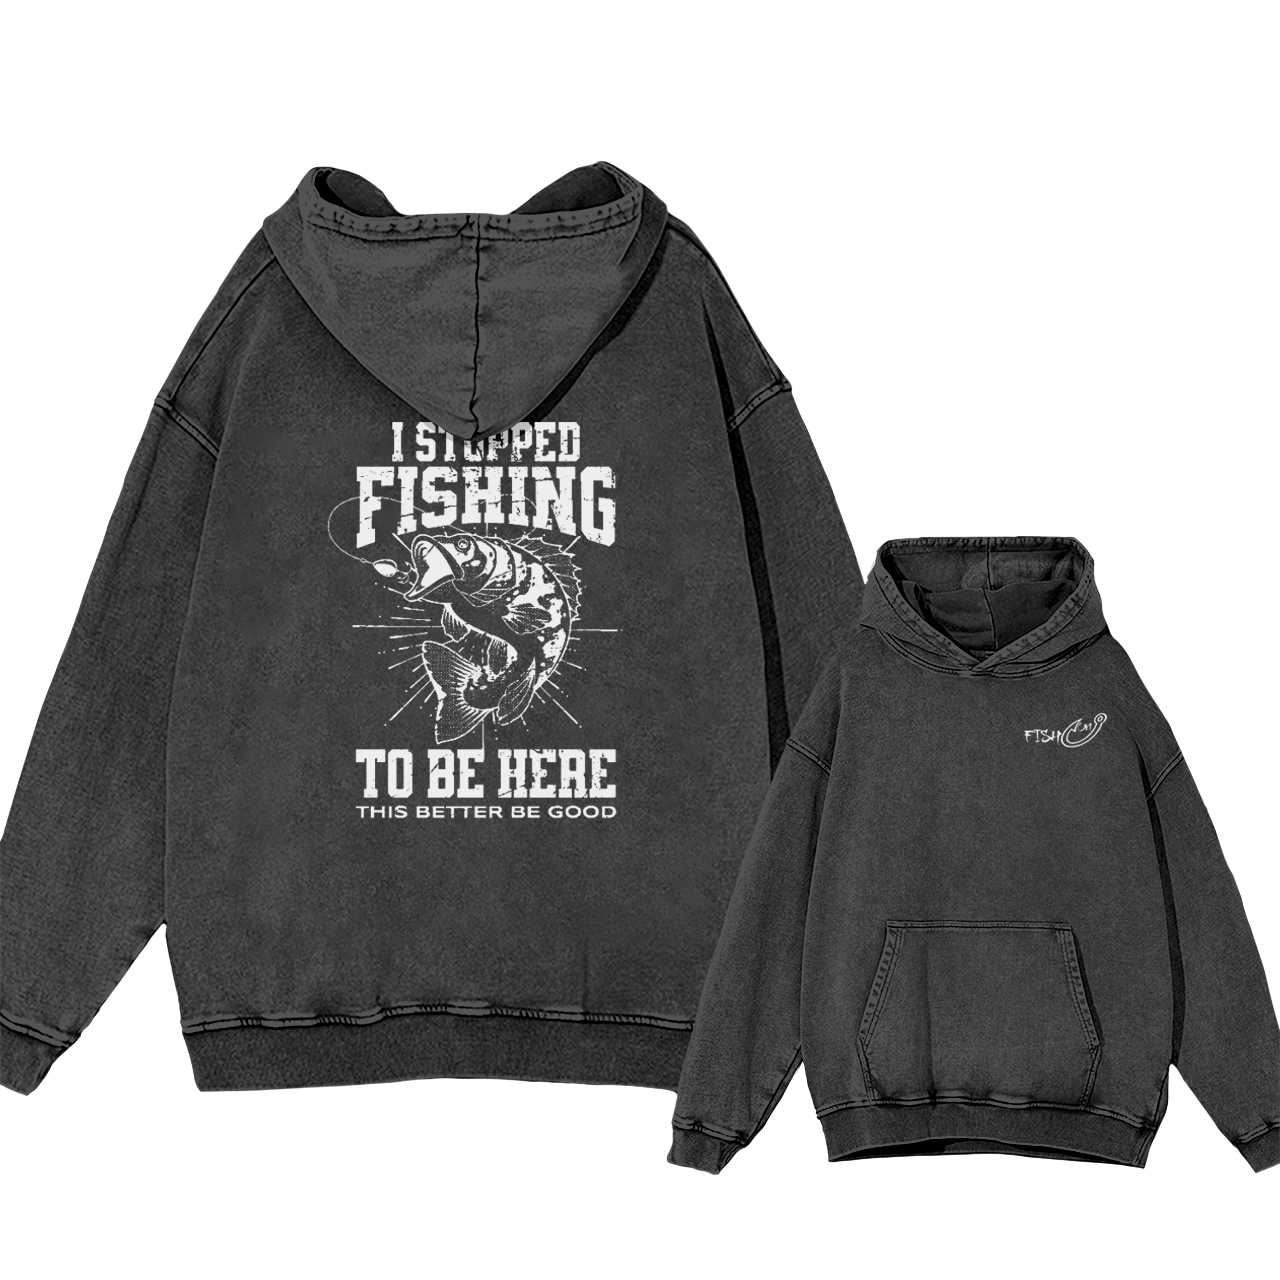 I Stopped Fishing To Be Here So This Better Be Good Garment-Dye Hoodies